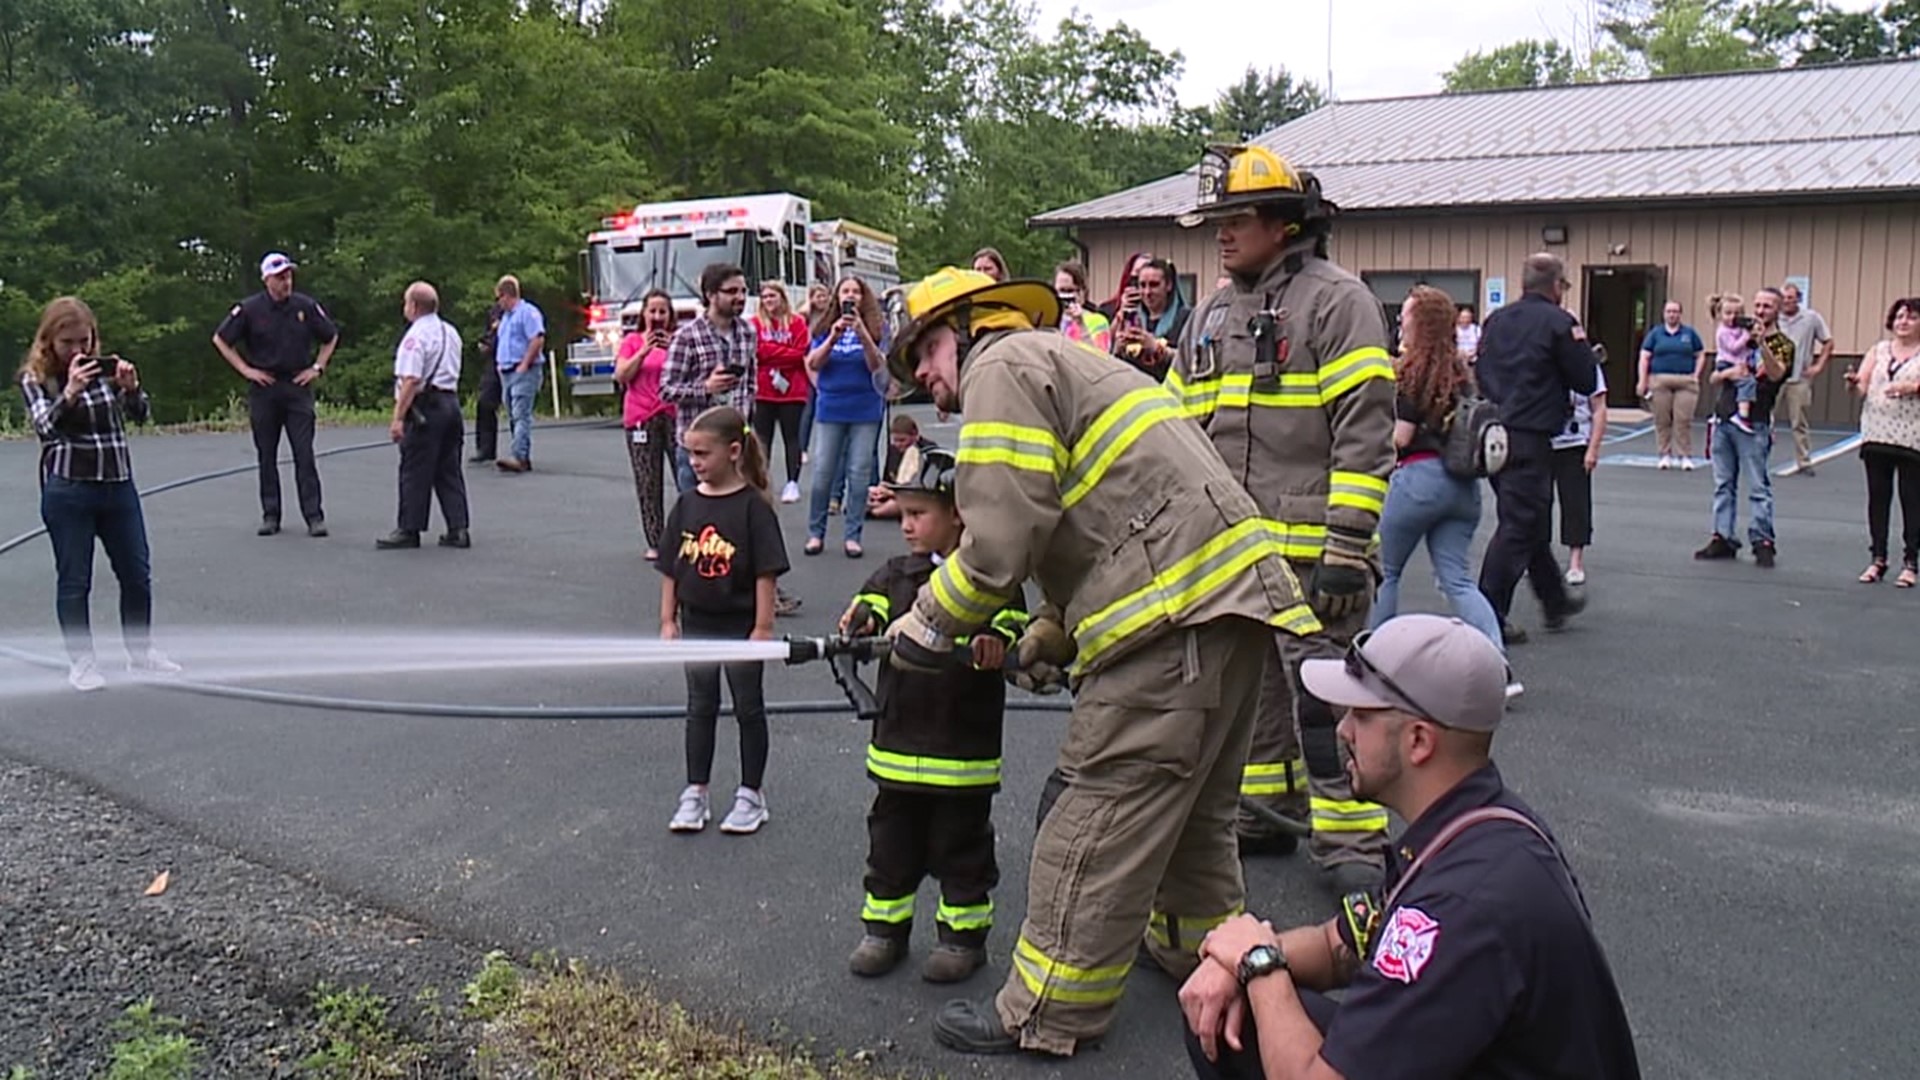 4-year-old Kenzie Moore's dream came true Saturday when the community rallied together and made him an honorary firefighter.